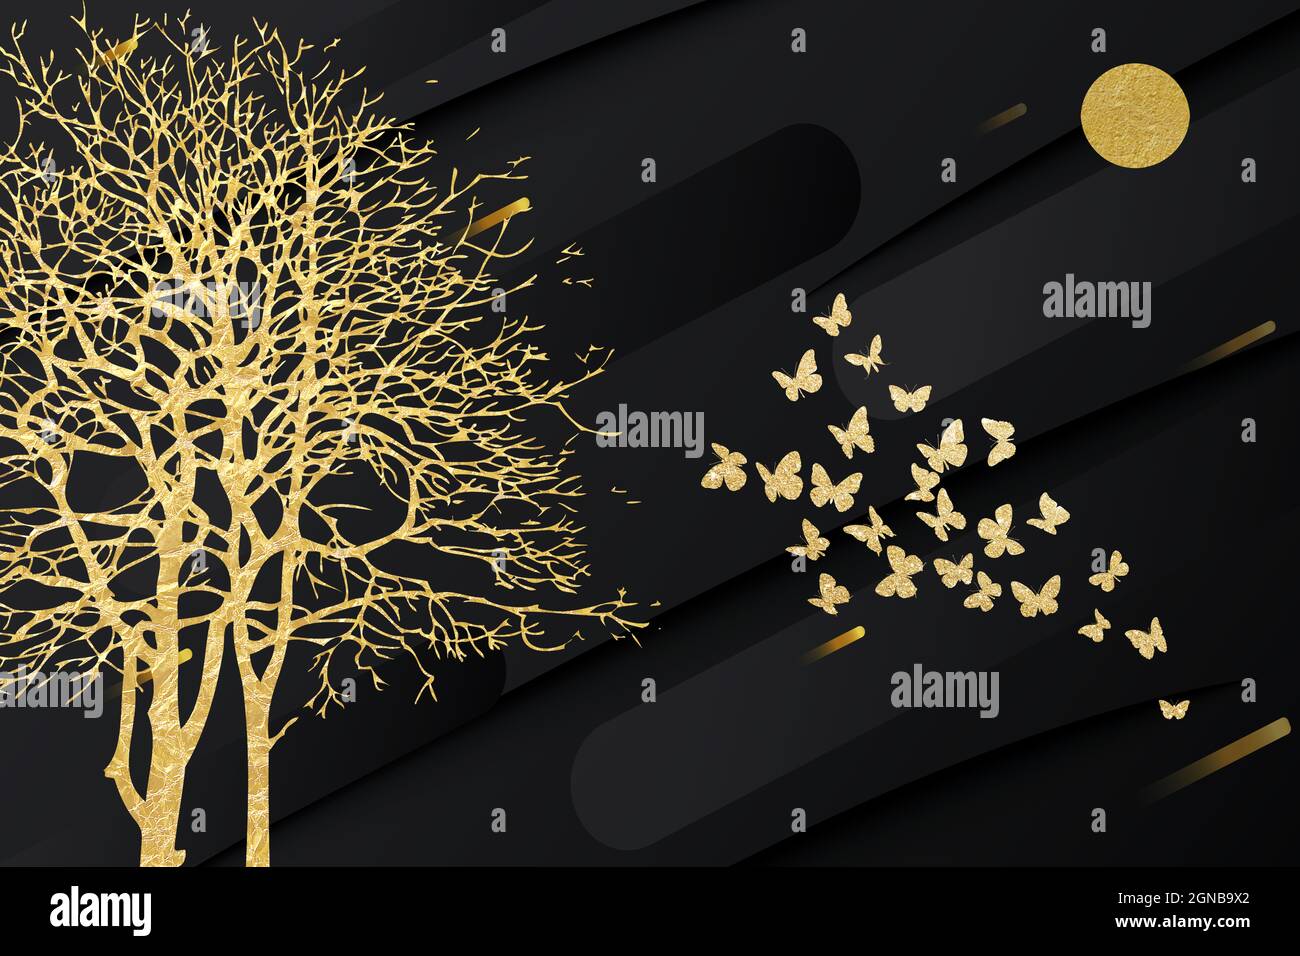 Customized wallpaper of golden tree and butterflies Stock Photo